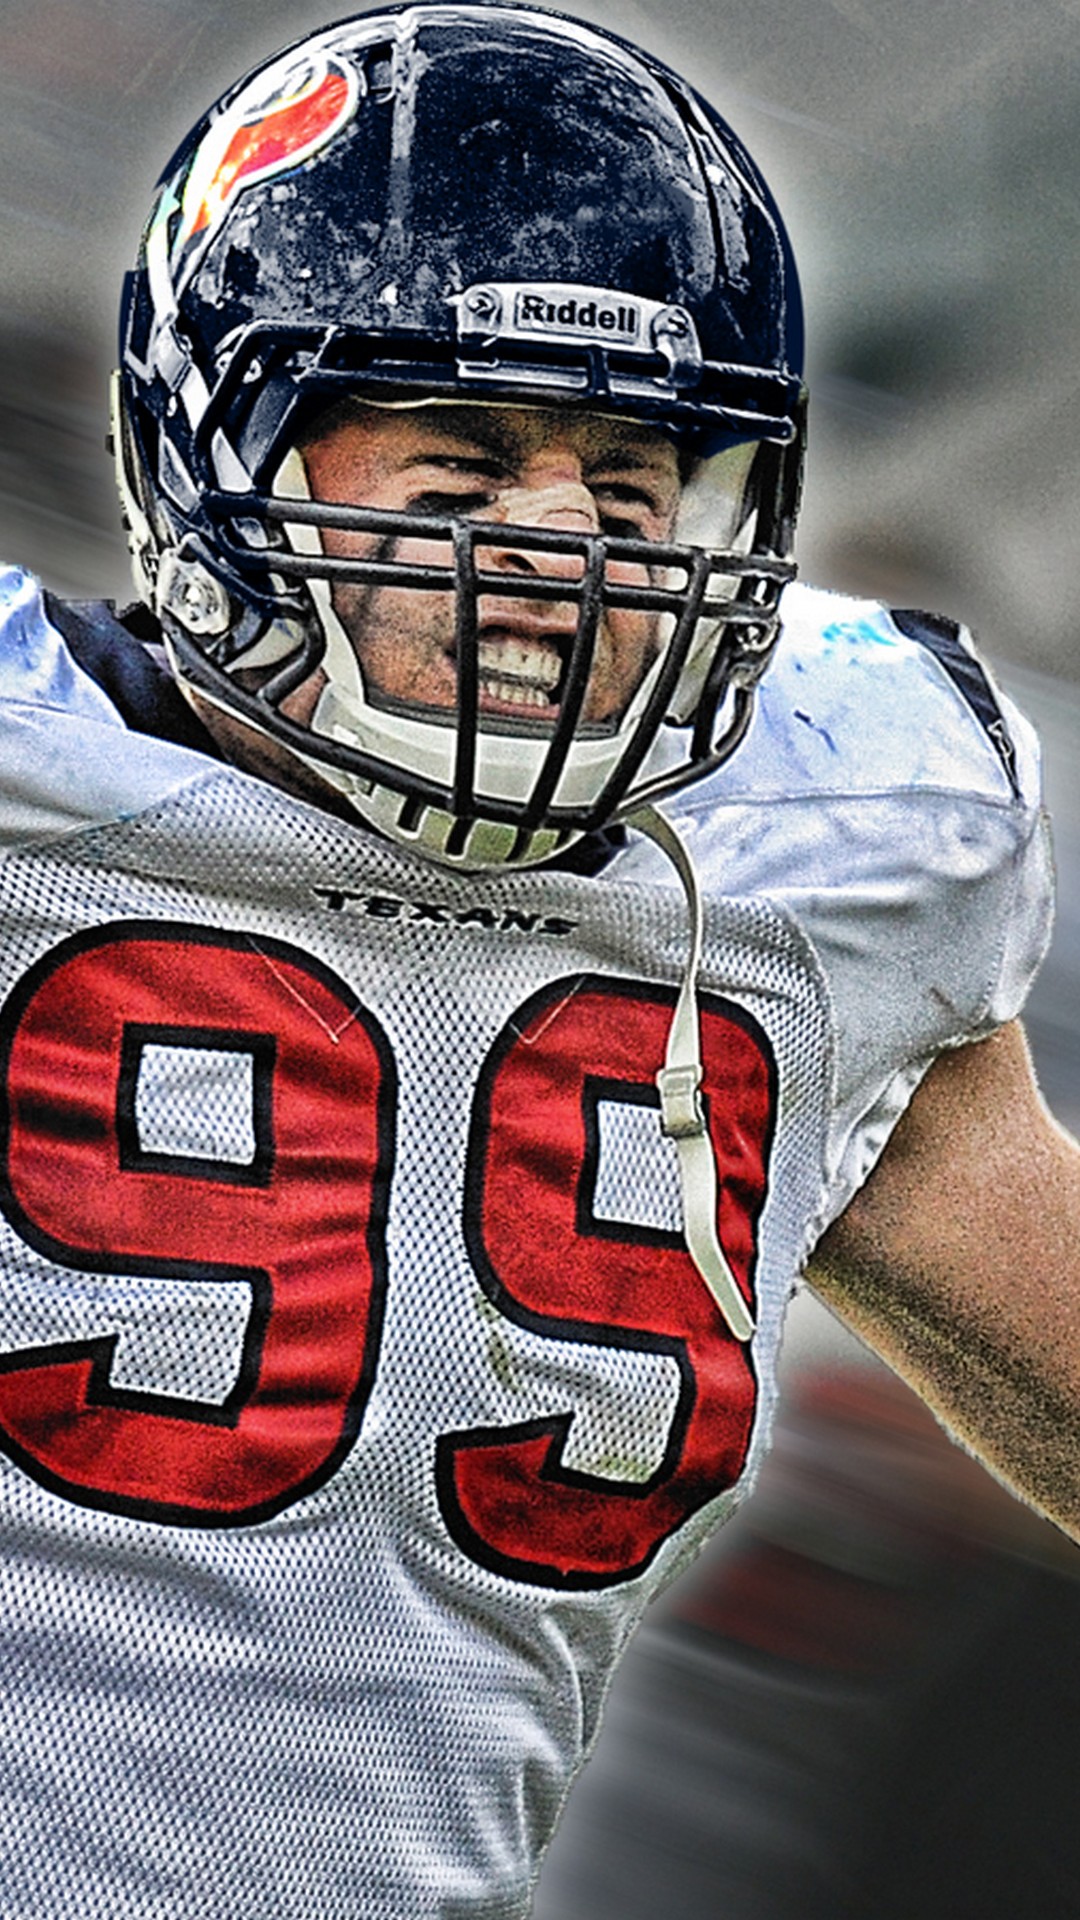 JJ Watt iPhone Home Screen Wallpaper With high-resolution 1080X1920 pixel. Download and set as wallpaper for Apple iPhone X, XS Max, XR, 8, 7, 6, SE, iPad, Android